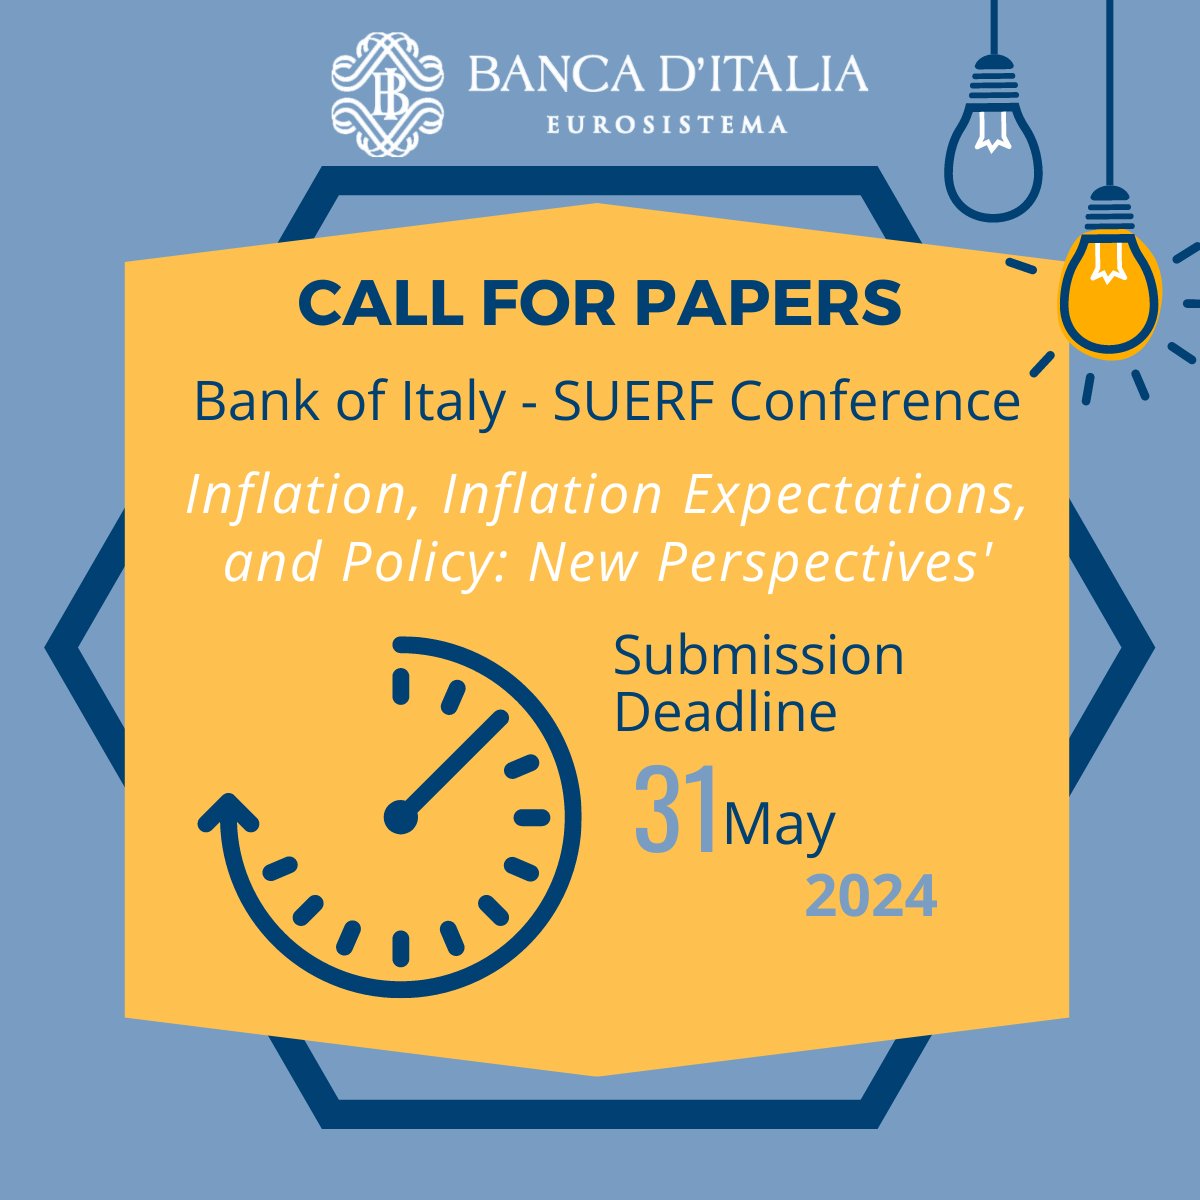 📢 #CallForPapers 📌 Conferenza Banca d'Italia - SUERF 'Inflation, Inflation Expectations, and Policy: New Perspectives' #Roma 18-19 novembre 2024 🗓️ Scadenza: 31 maggio 2024 suerf.org/wp-content/upl… Keynote speakers: Philip R. Lane (@ECB) terrà la SUERF Marjolin Lecture, Gauti…